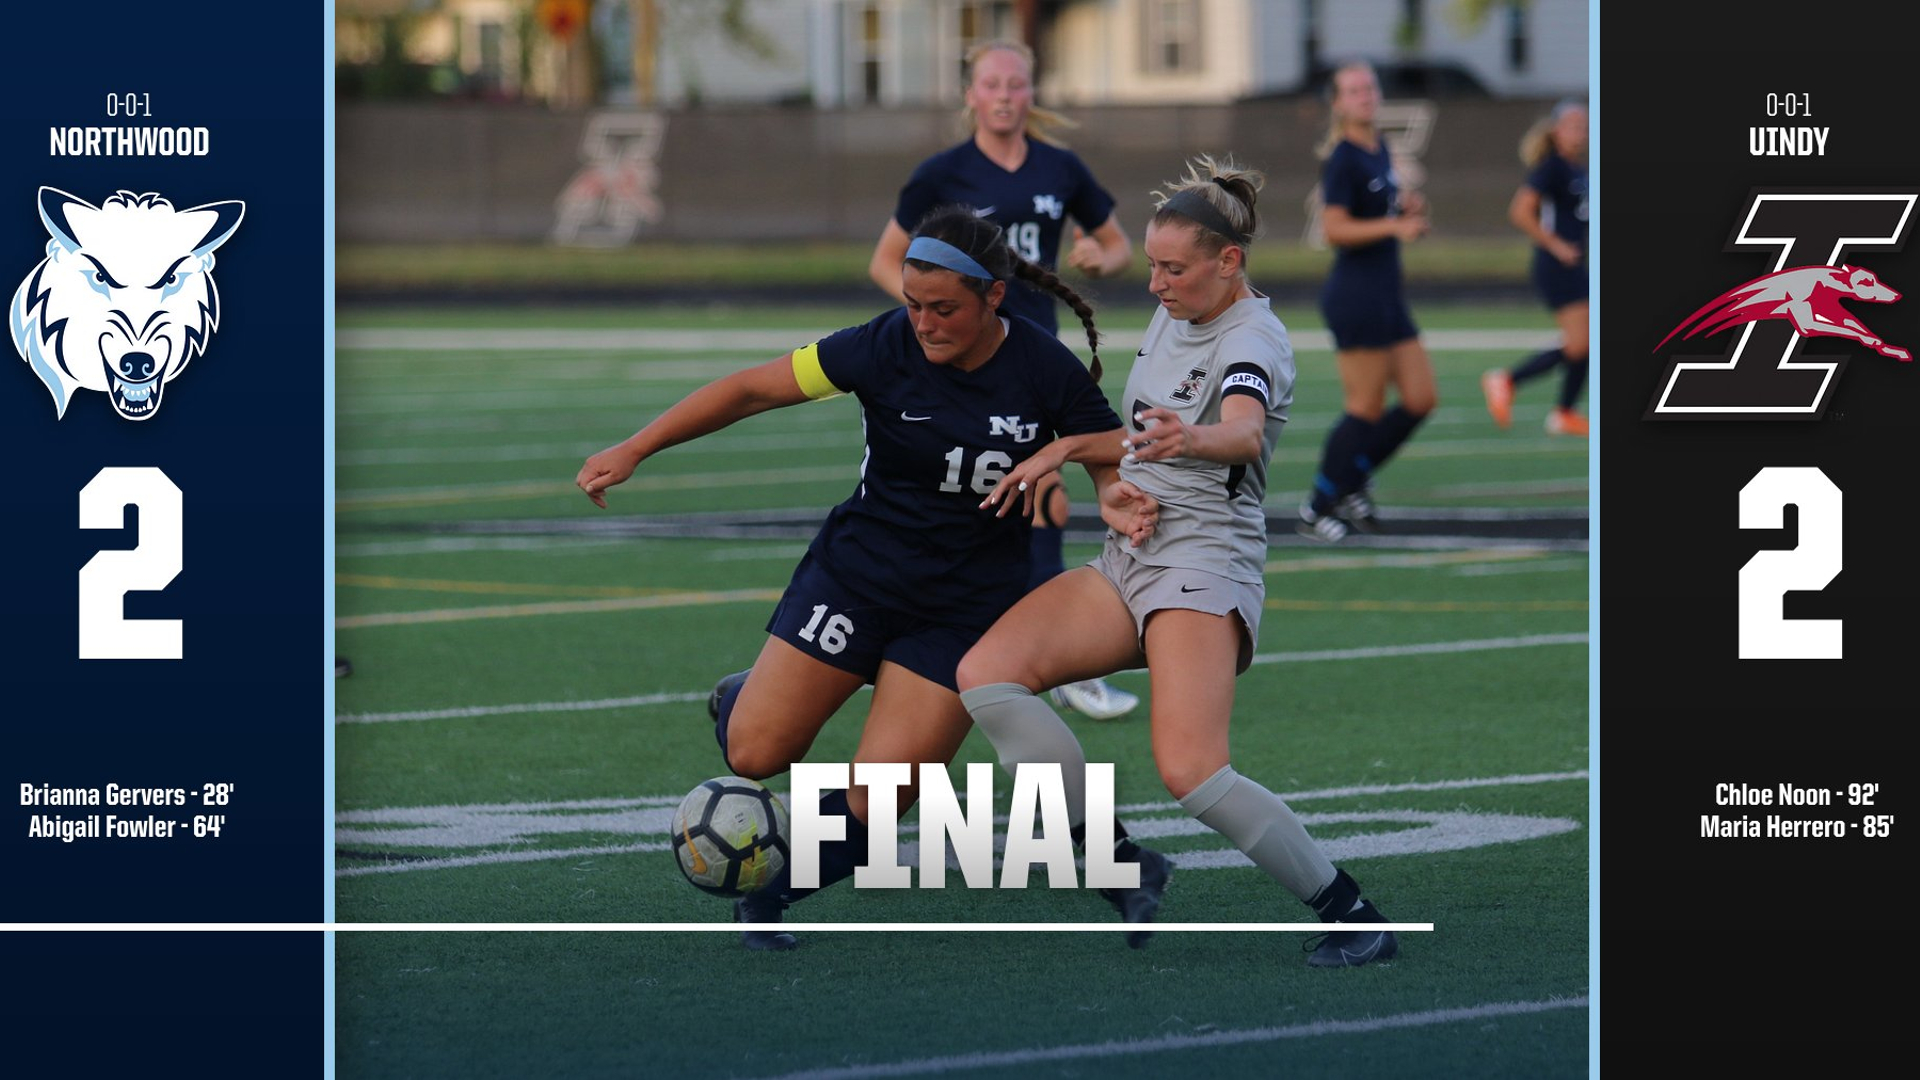 Women's Soccer Takes Draw In Season Opener At UIndy, 2-2